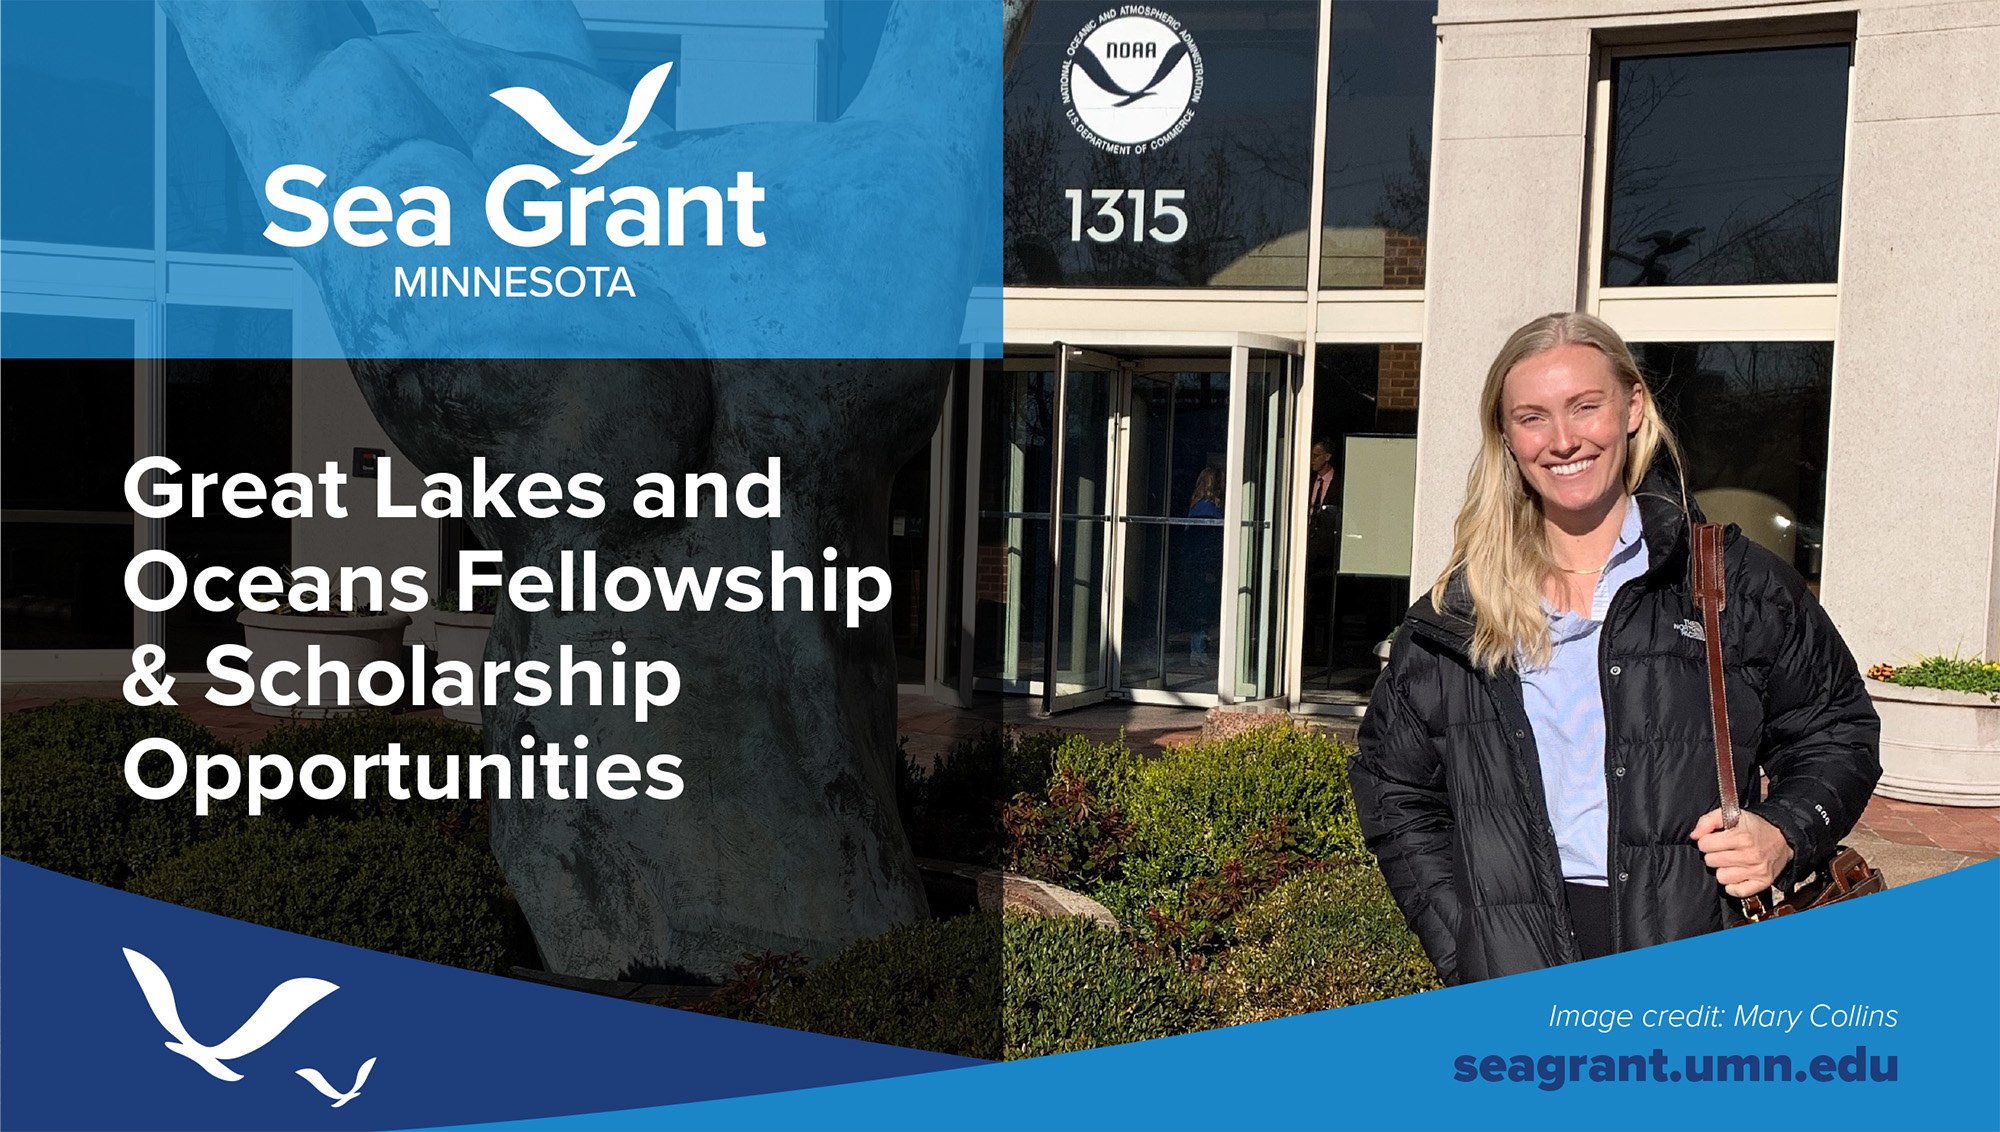 Sea Grant Minnesota. Great Lakes and Oceans Fellowship & Scholarship Opportunities. seagrant.umn.edu. Person standing by statue of an outstretched human hand. 